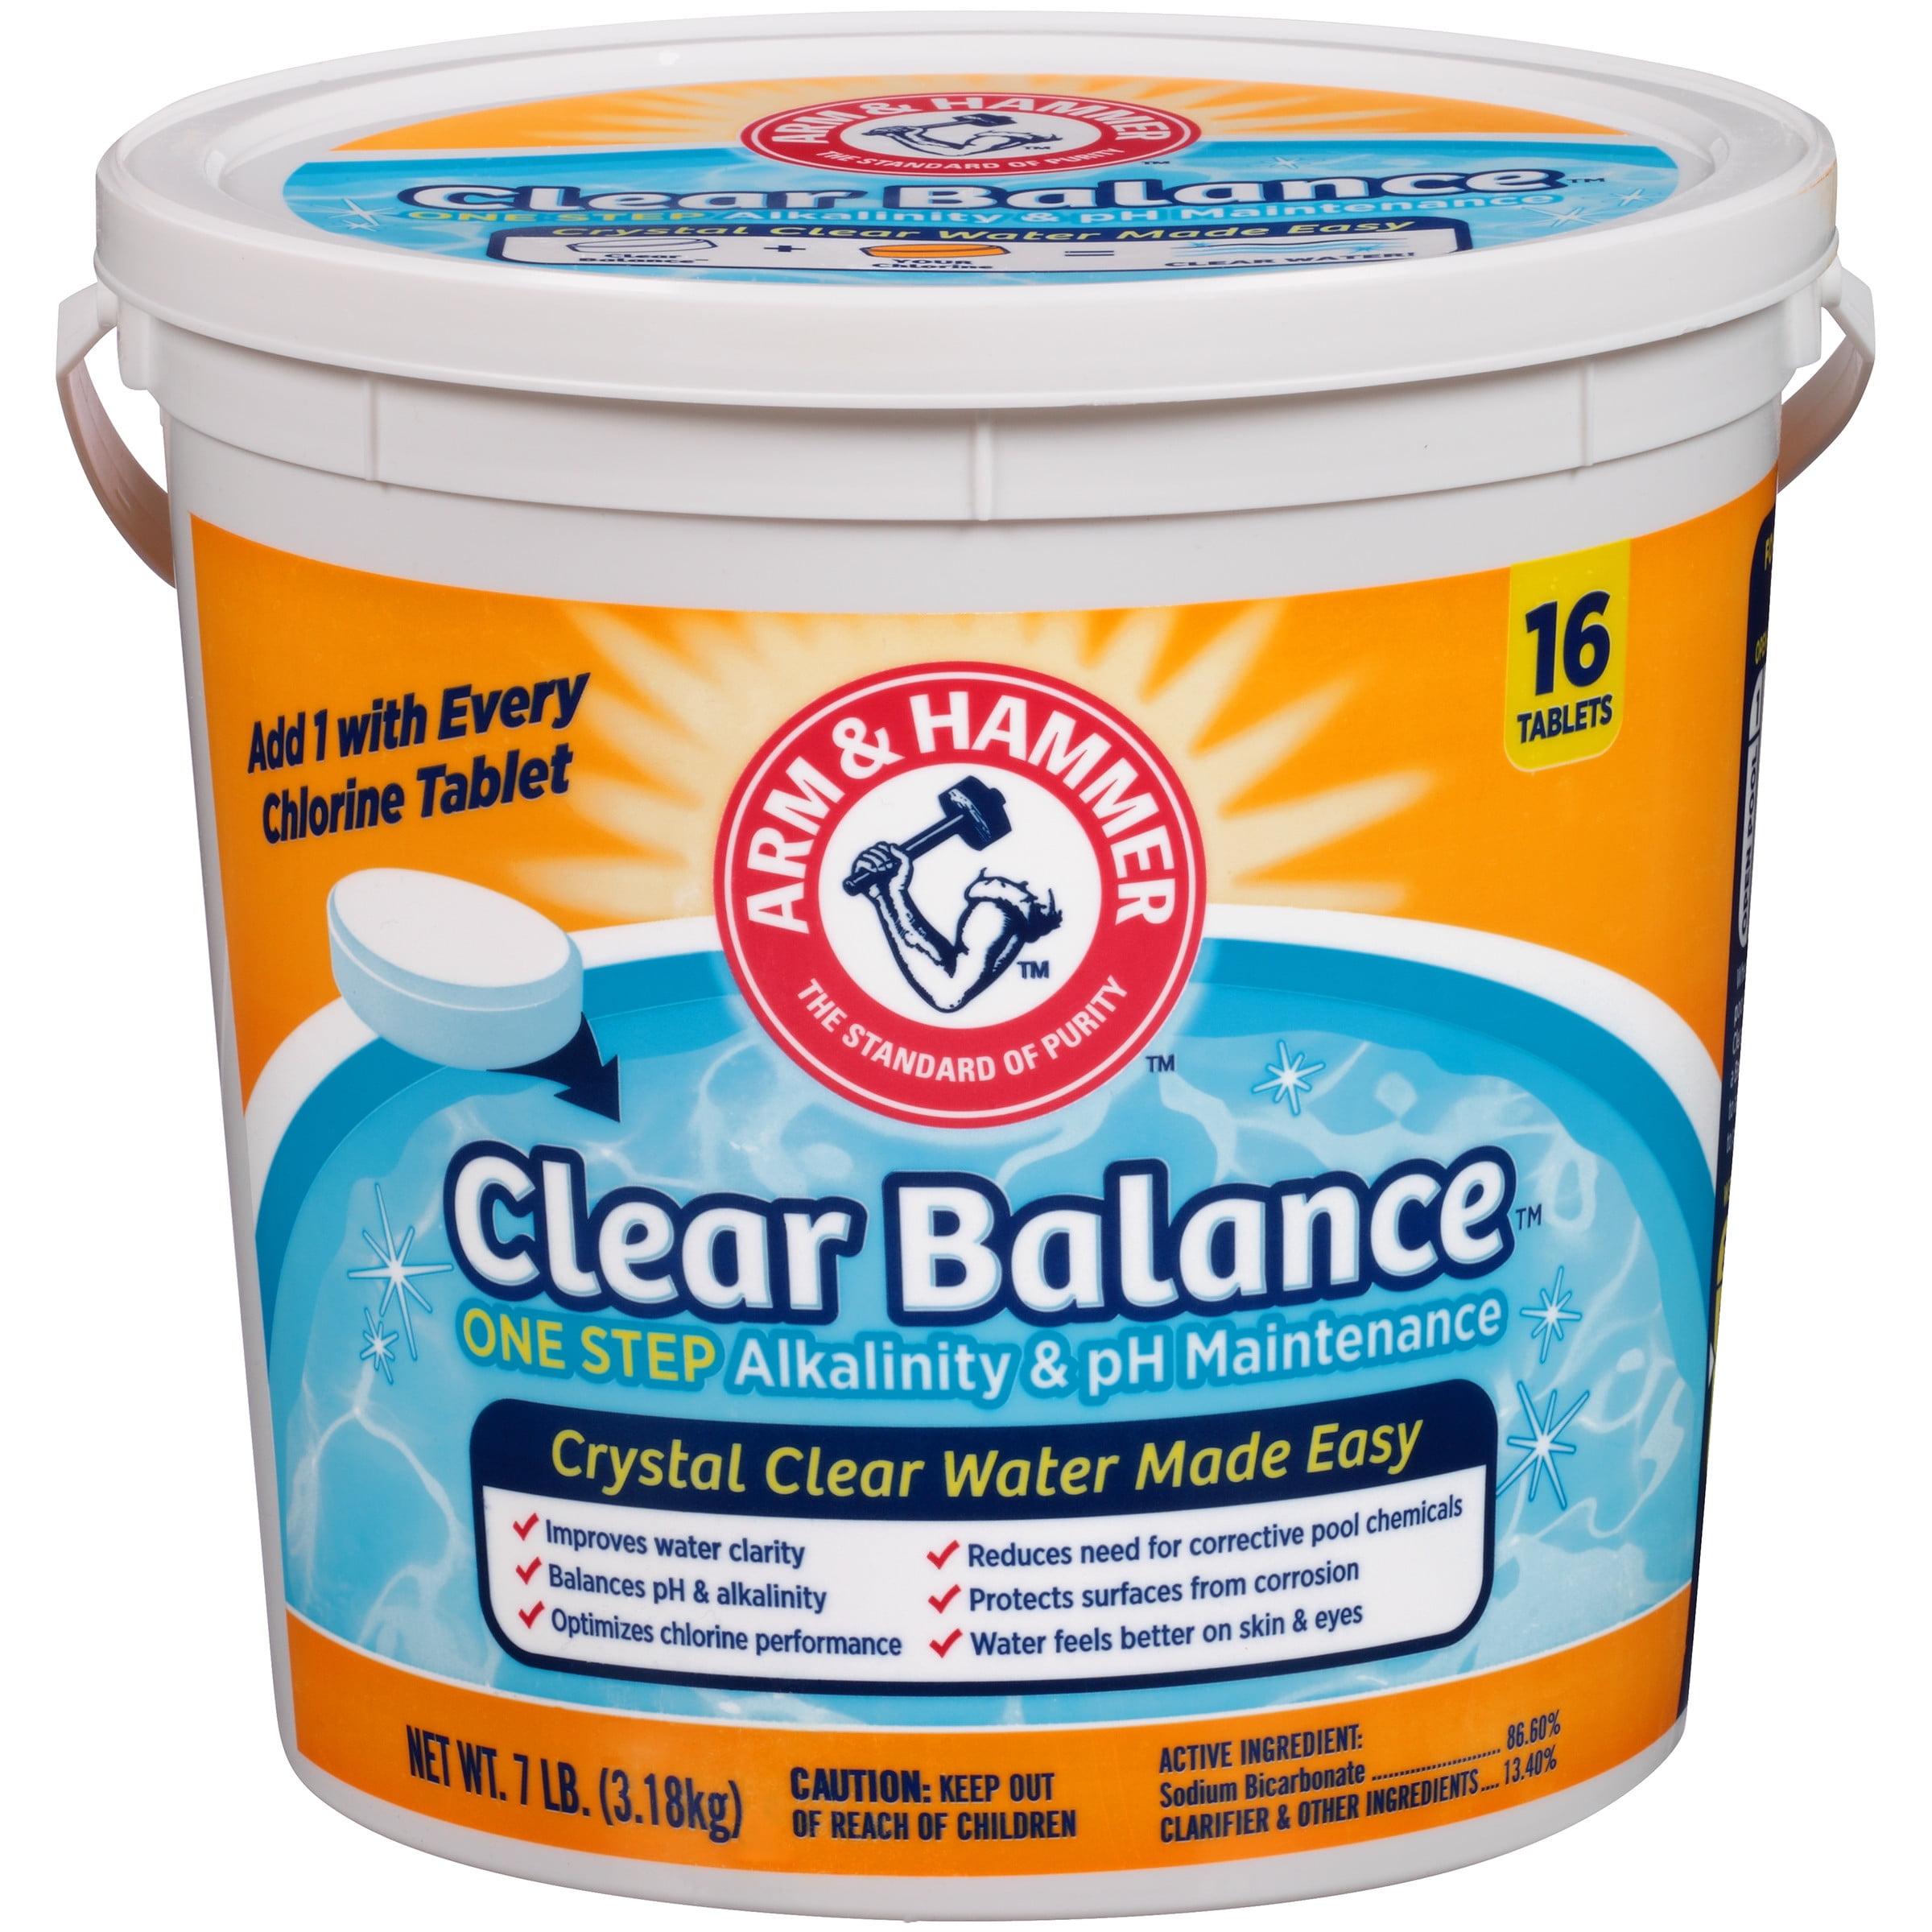 ARM & HAMMER Clear Balance Swimming Pool Alkalinity & pH Maintenance Tablets, White, 1 Pack, 16 Count